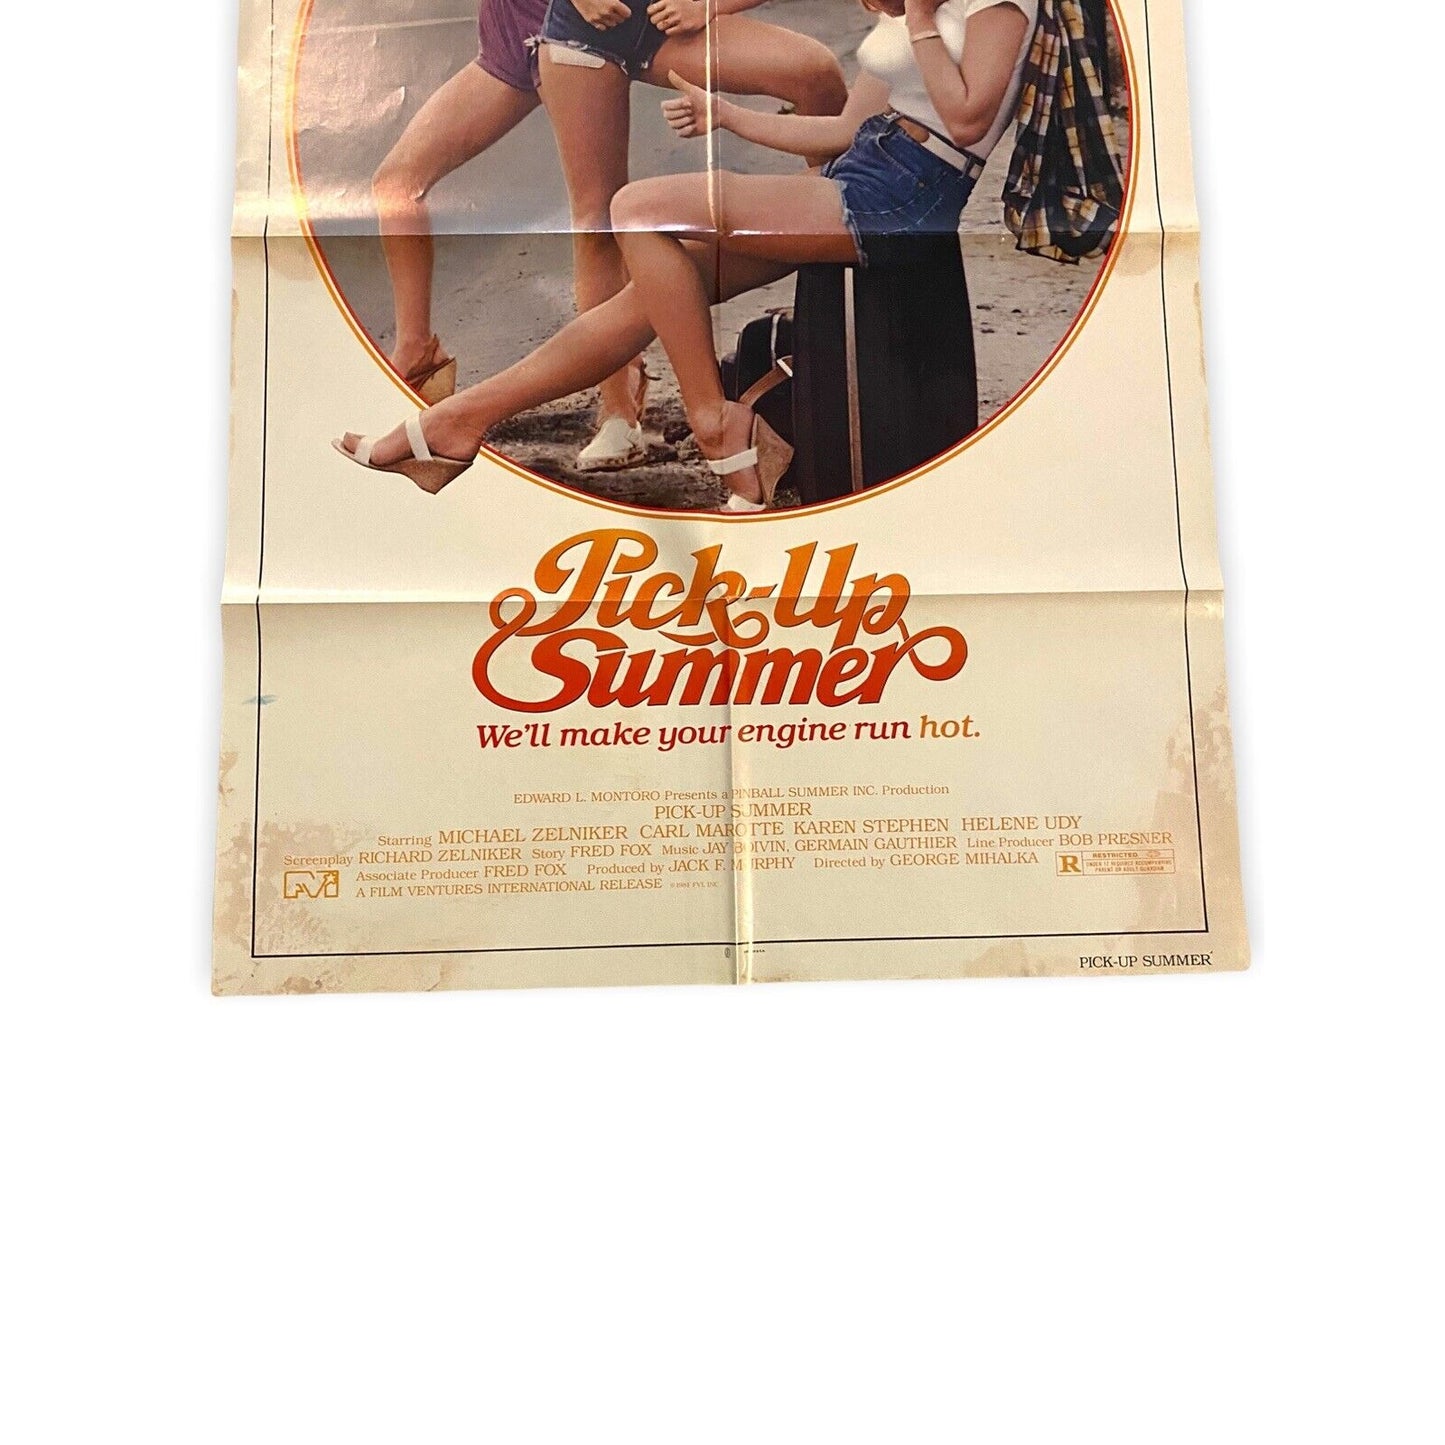 80's Movie Poster "Pick-Up Summer" Original 1981 One Sheet Poster 27" x 41"